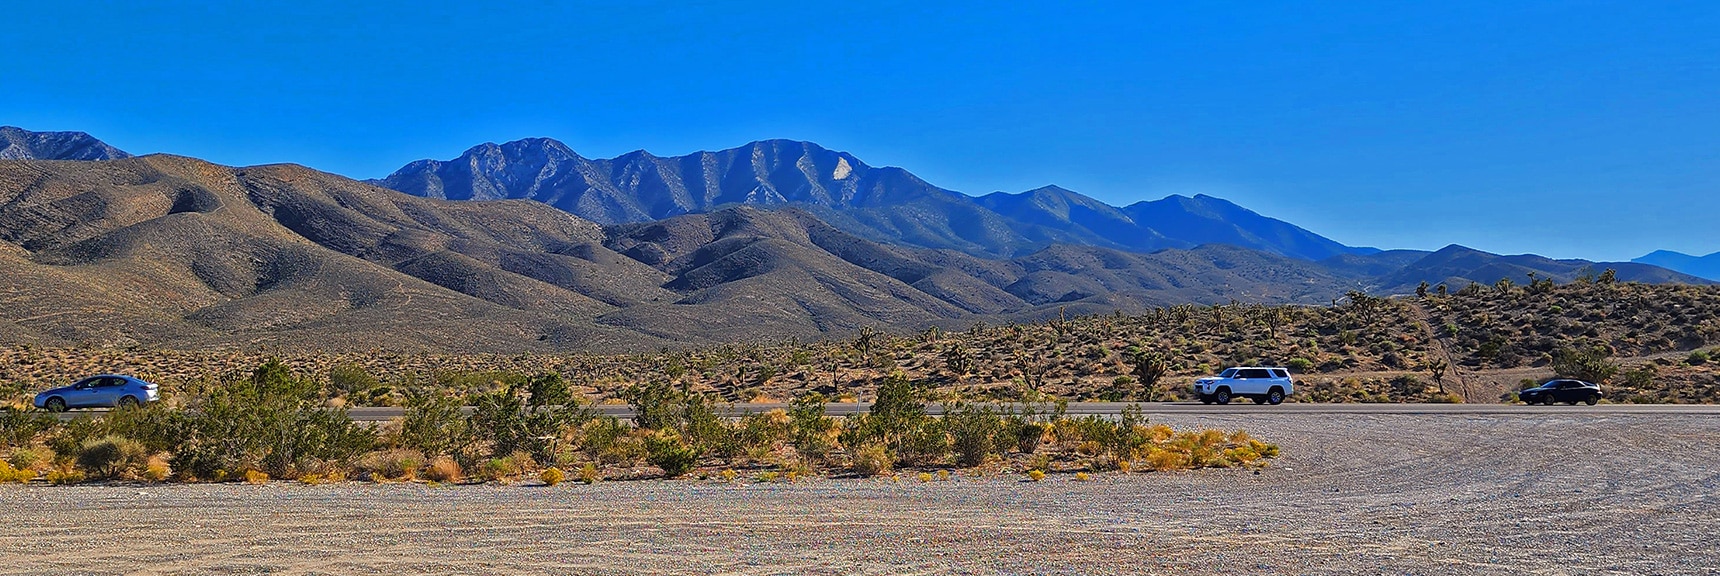 View Back Toward La Madre Mountains from Parking Area on Kyle Canyon Road | Kyle Canyon Grand Crossing | Northern Half | La Madre Mountains Wilderness, Nevada